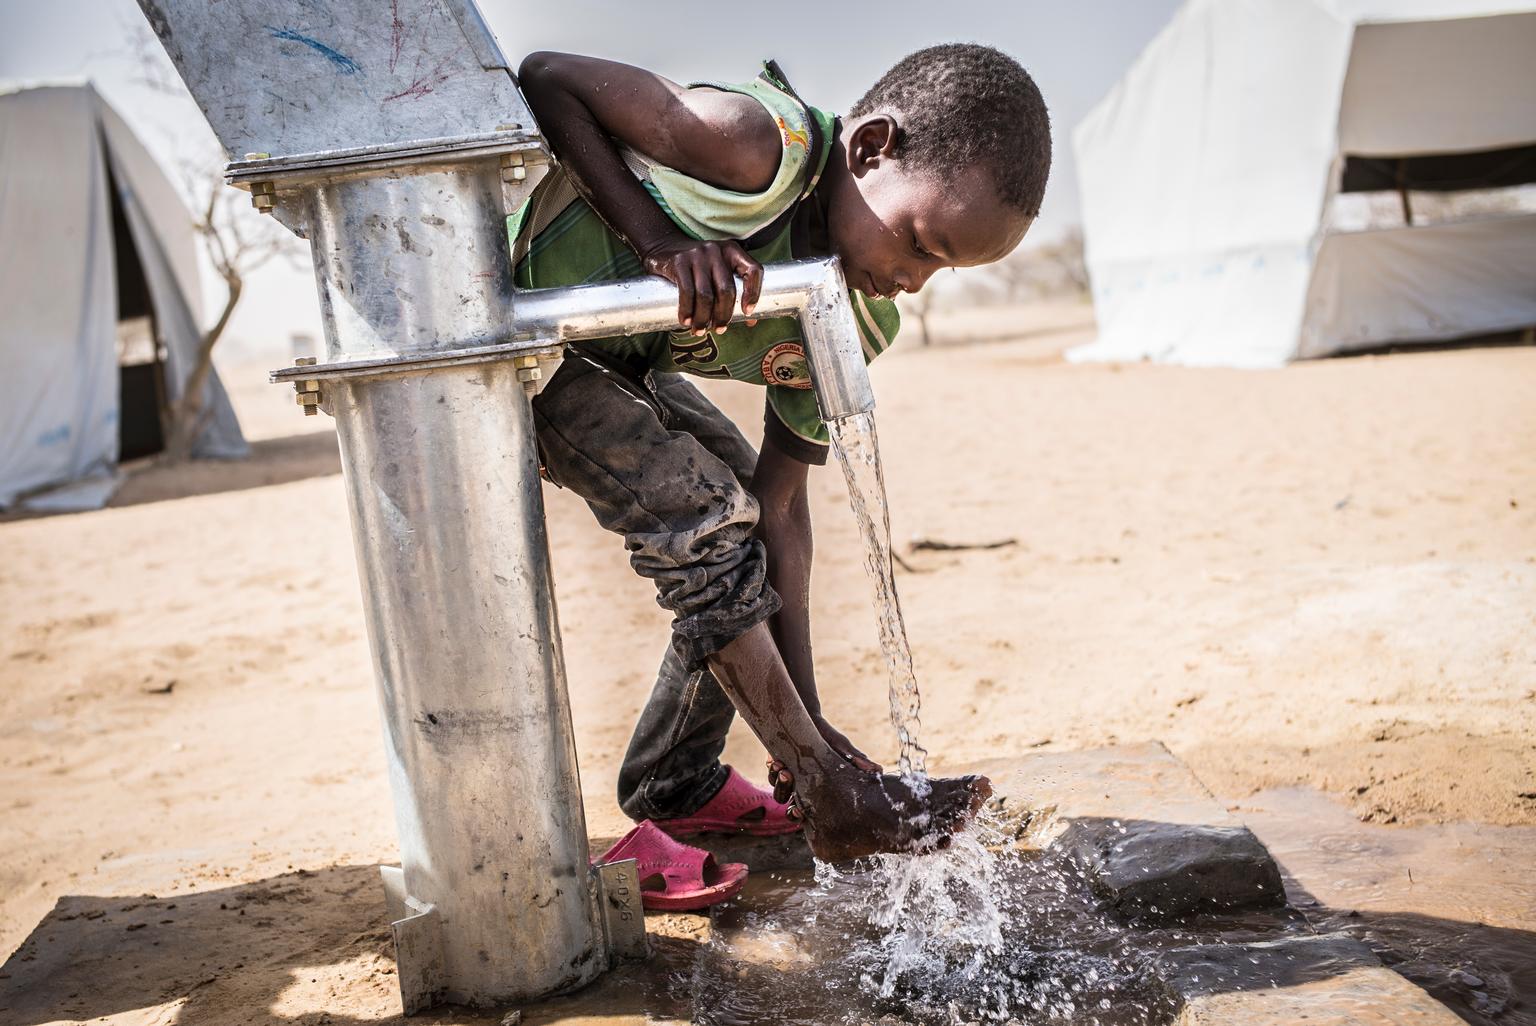 On 14 April, a boy washes his feet, at a handpump in the Dar es Salam camp in in the Dar es Salam camp in the Baga Sola area, in the Lake Region. UNICEF has constructed 11 boreholes, as well as more than 200 latrines and 100 showers, and is supporting hygiene activities in the camp, which currently shelters more than 4,900 Nigerian refugees.
By mid-April 2015, more than 18,800 Nigerians had sought refuge in Chad to escape the continuing crisis in their homeland. Many of them had travelled for days, on foot or in small canoes and fishing boats across Lake Chad, to reach safety. All continue to face hardships, with children at increasing risk of falling ill from disease. There is also a risk of continued violence because of the close proximity to Nigerias border. The large number of refugees is also straining already weak infrastructure and services in host communities overwhelmed by the influx. Working with the Government of Chad and other partners, UNICEF is supporting health, nutrition, water, sanitation and hygiene (WASH), education, child protection and other interventions, including the setup of child-friendly spaces to provide psychosocial support for vulnerable children  many of whom have lost or become separated from family members and have witnessed violence and atrocities. UNICEF is seeking US $63.1 million to meet projected emergency needs in the country for 2015, including for refugee and displaced children and their families, and host communities.